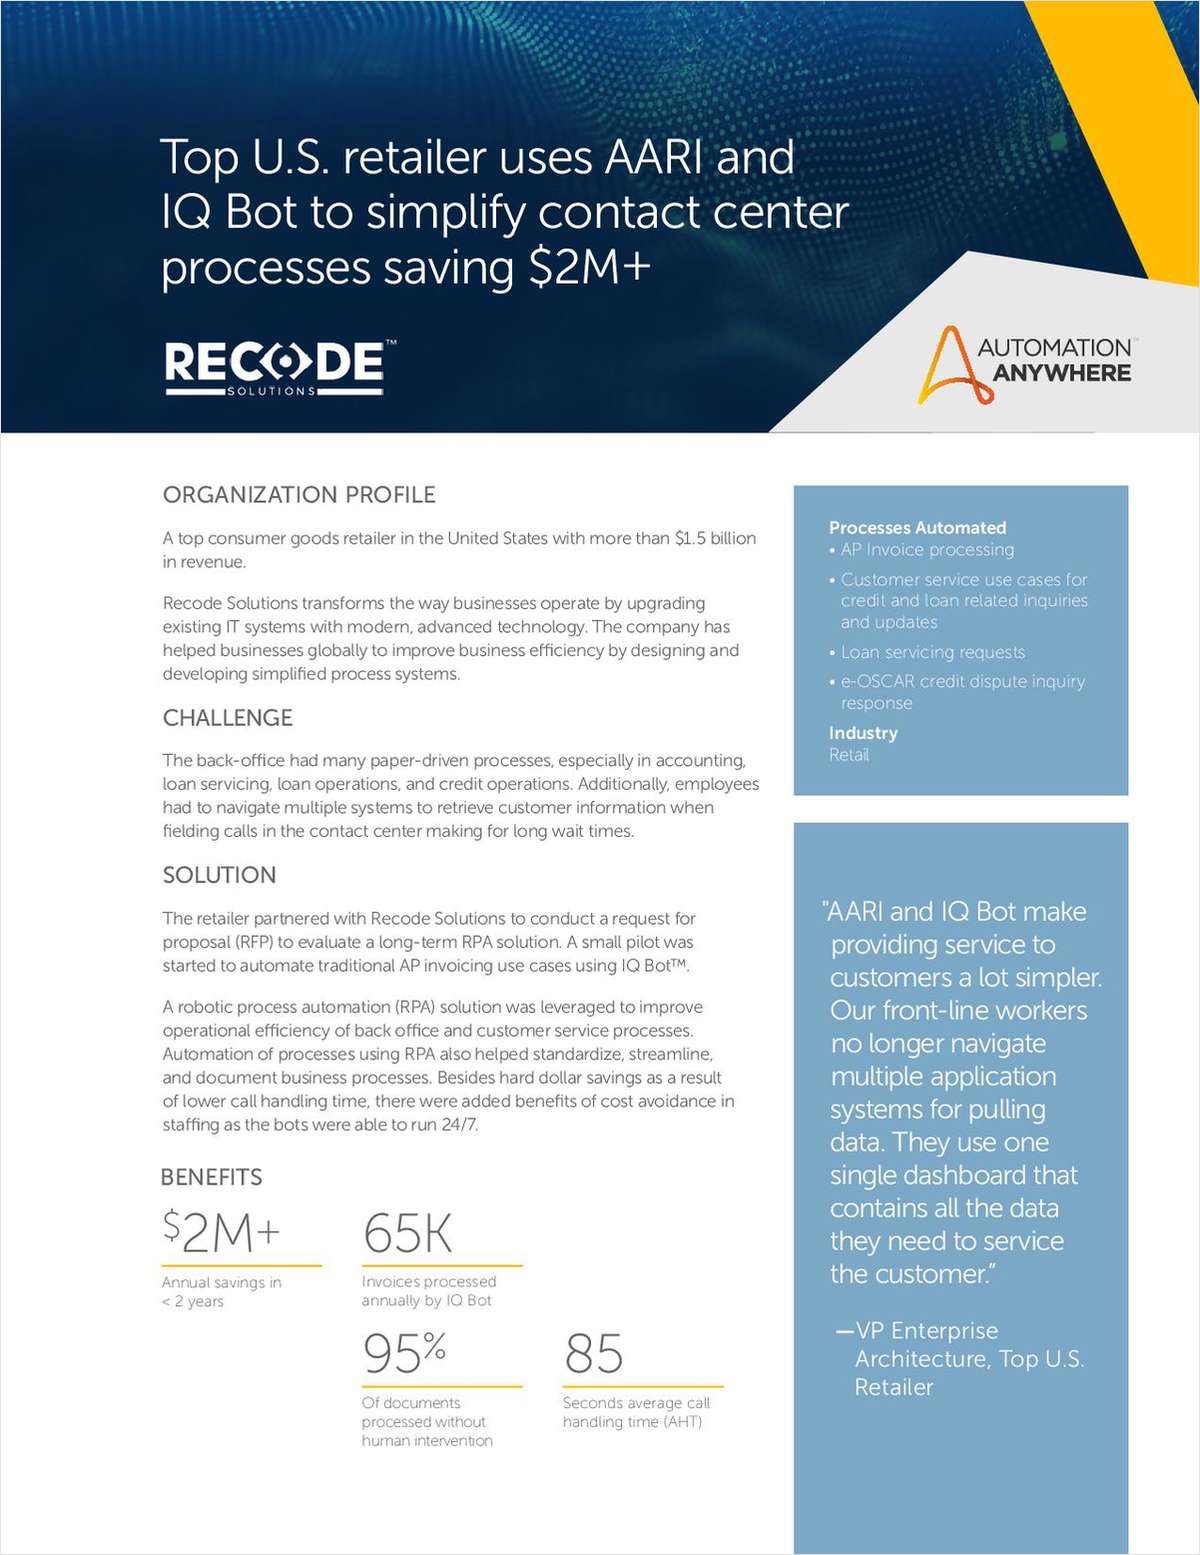 IQ Bot and AARI help top U.S. retailer save $2M+ by simplifying contact center processes